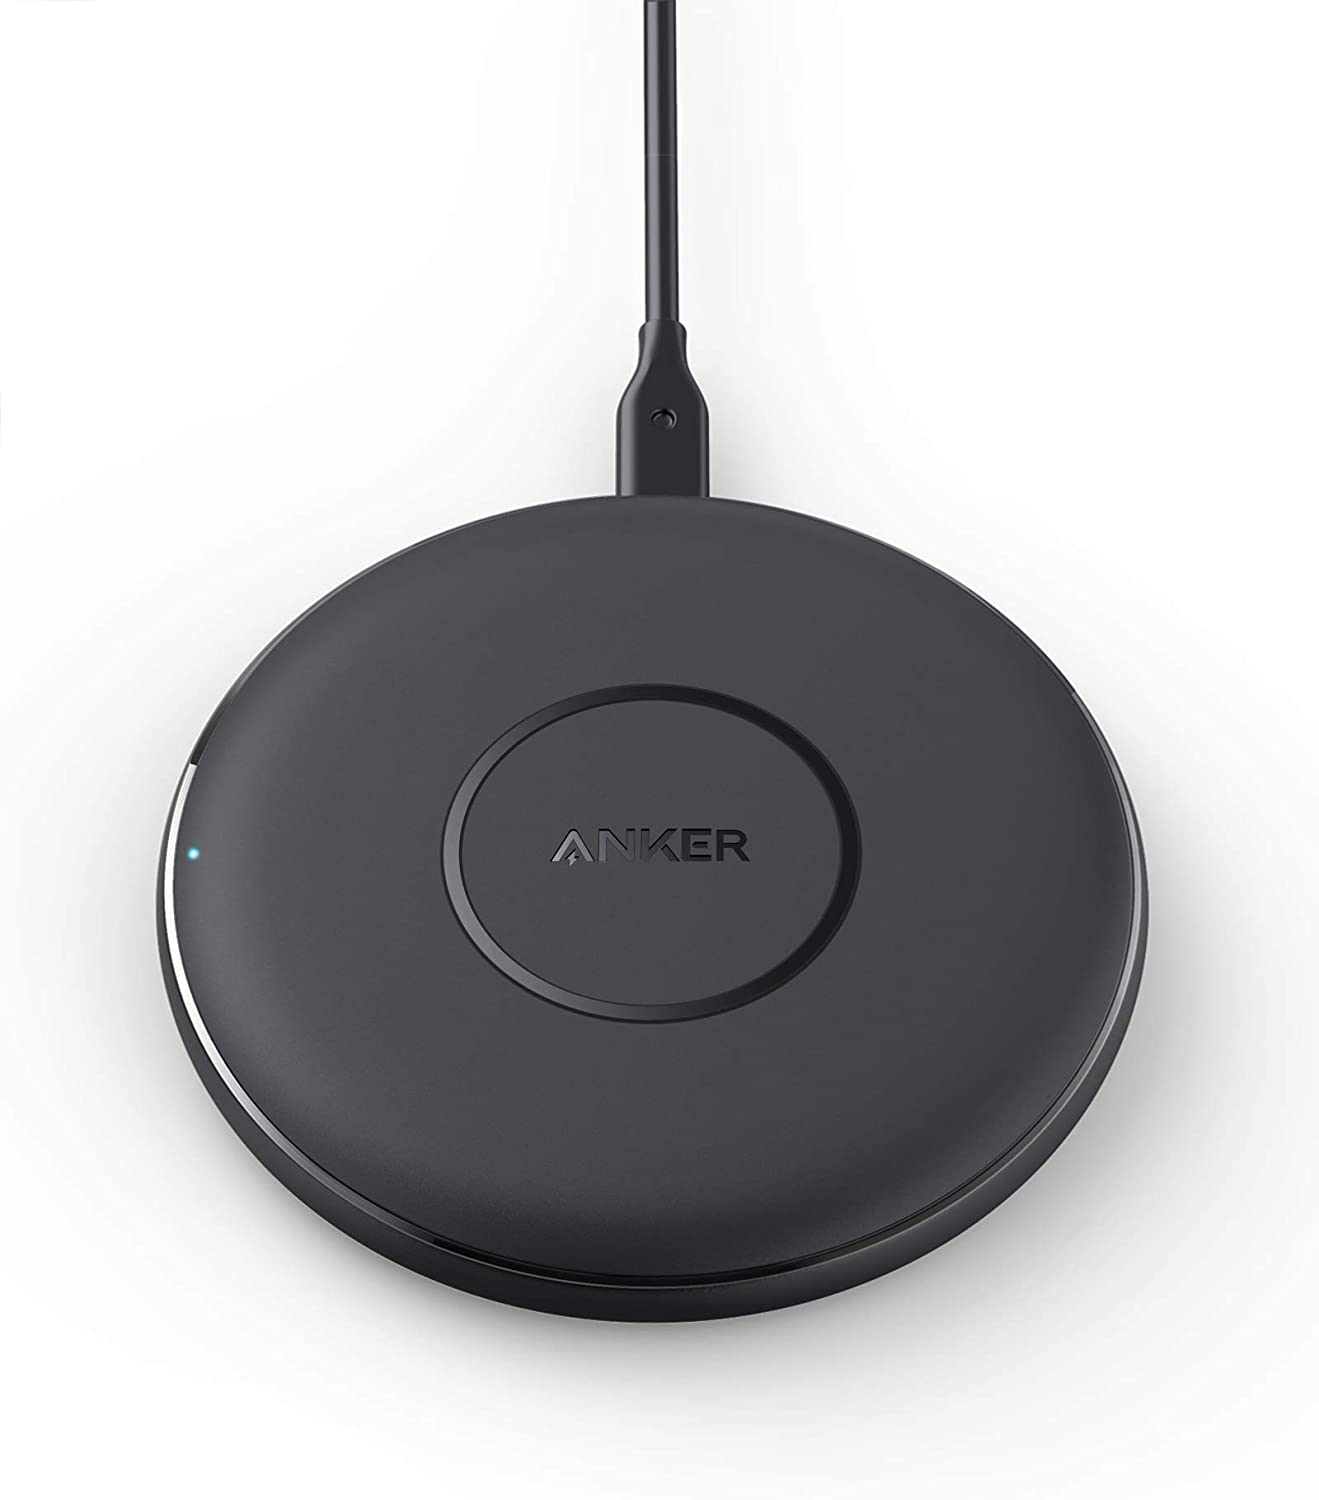 10W Max Wireless Charger, 313 Wireless Charger (Pad), Qi-Certified Wireless Charging 7.5W